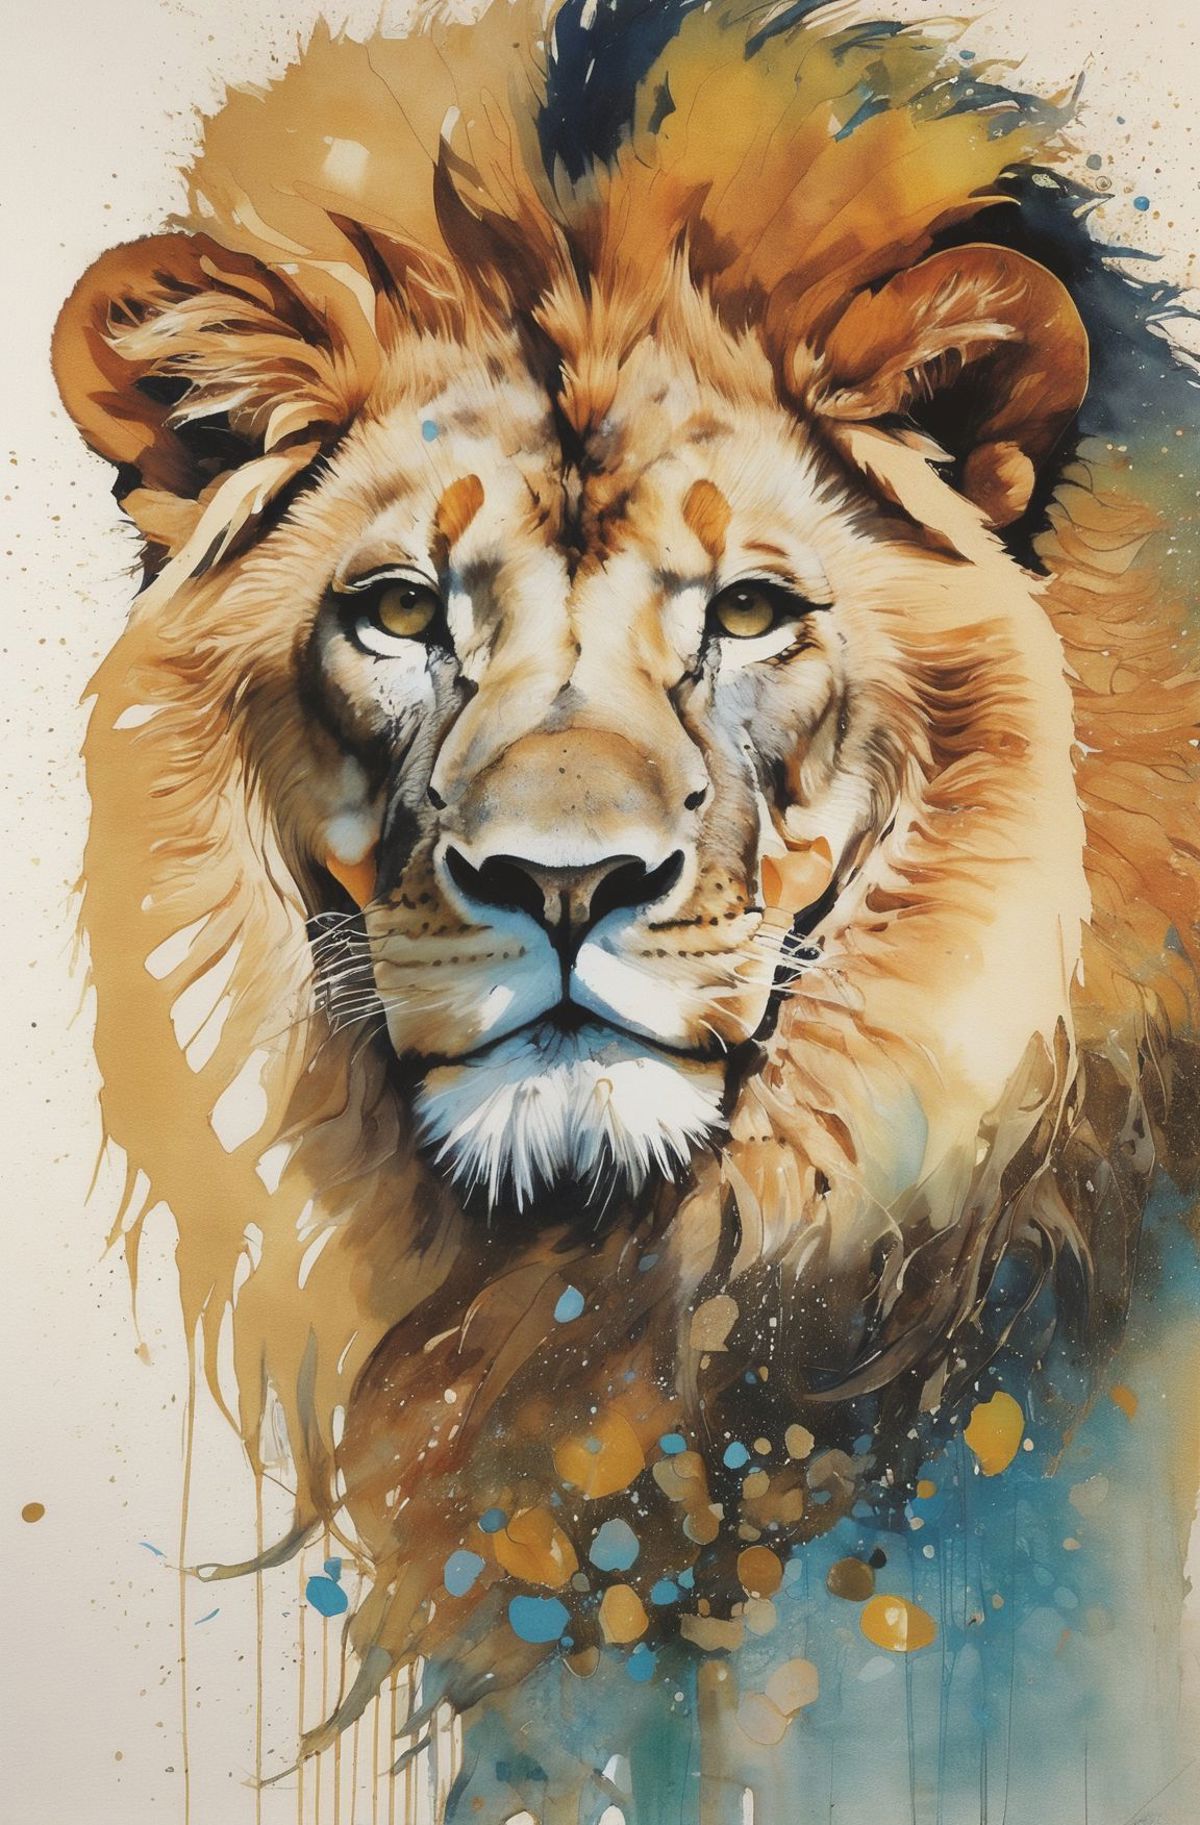 A painting of a lion with a blue and yellow background.